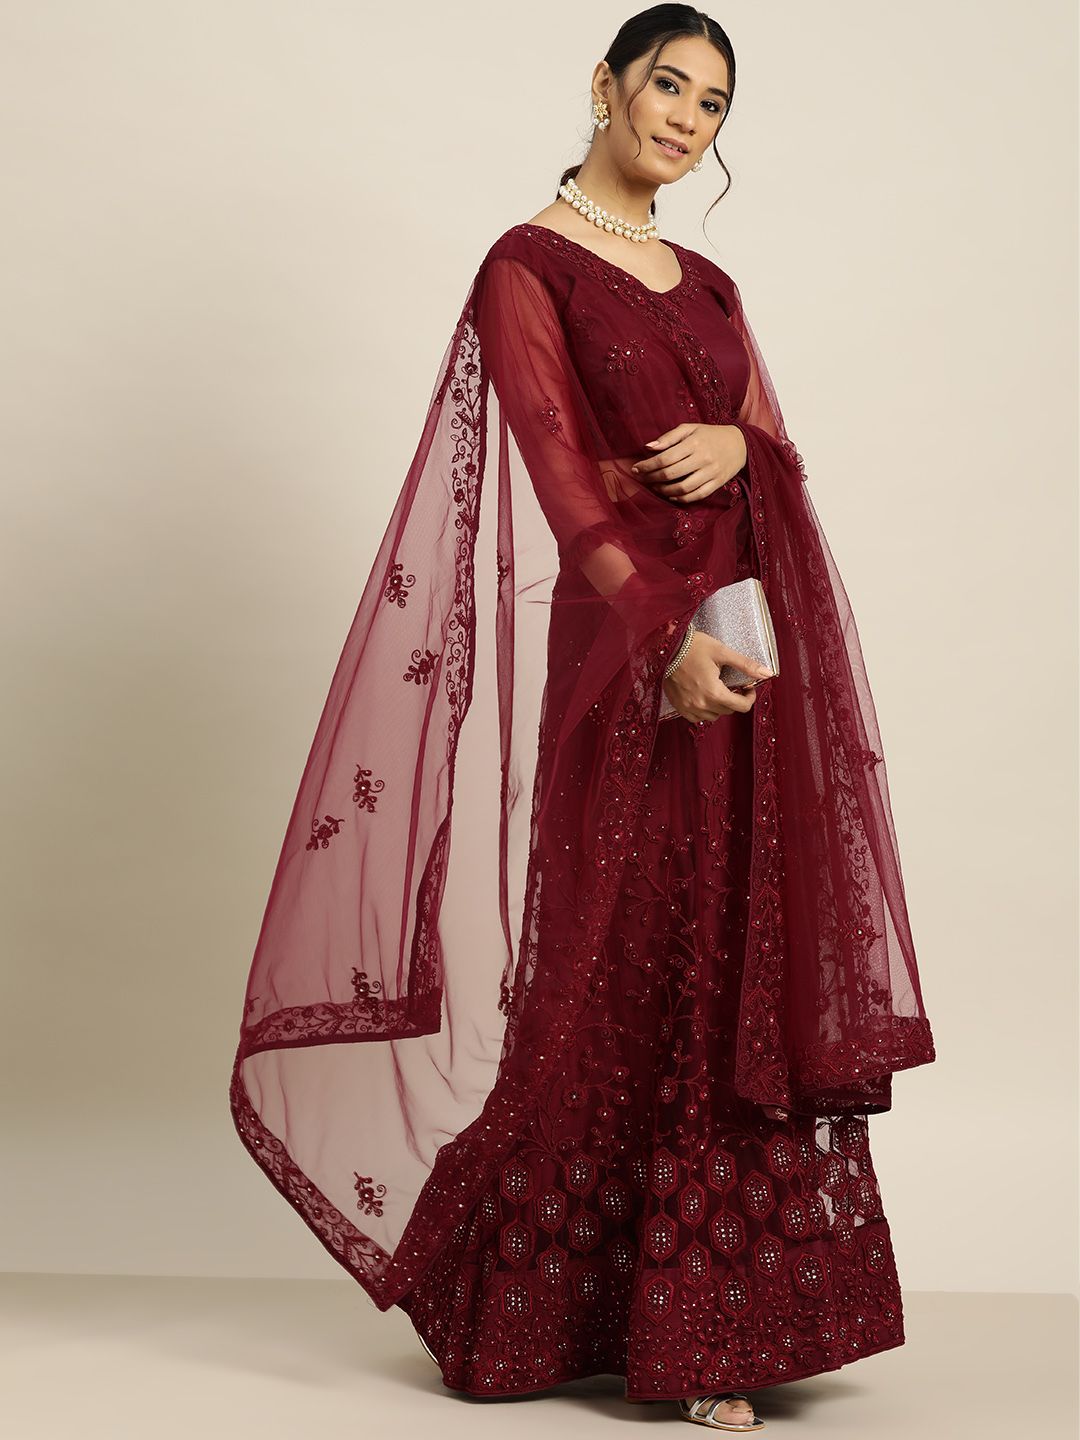 Sangria Burgundy Embroidered Beads and Stones Semi-Stitched Lehenga & Unstitched Blouse With Dupatta Price in India